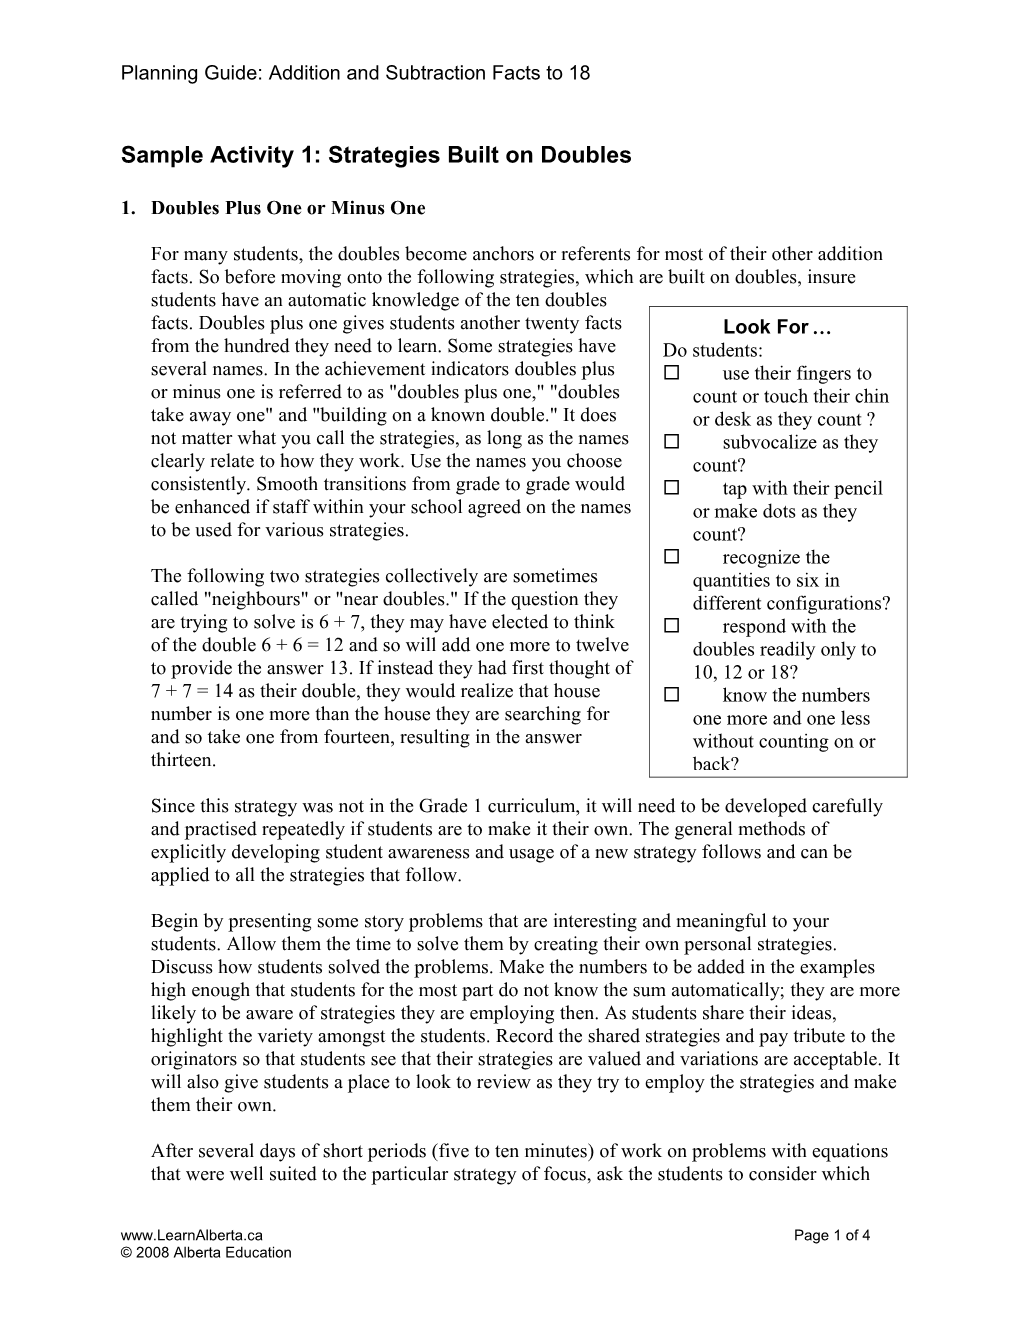 Sample Activity 1: Strategies Built on Doubles